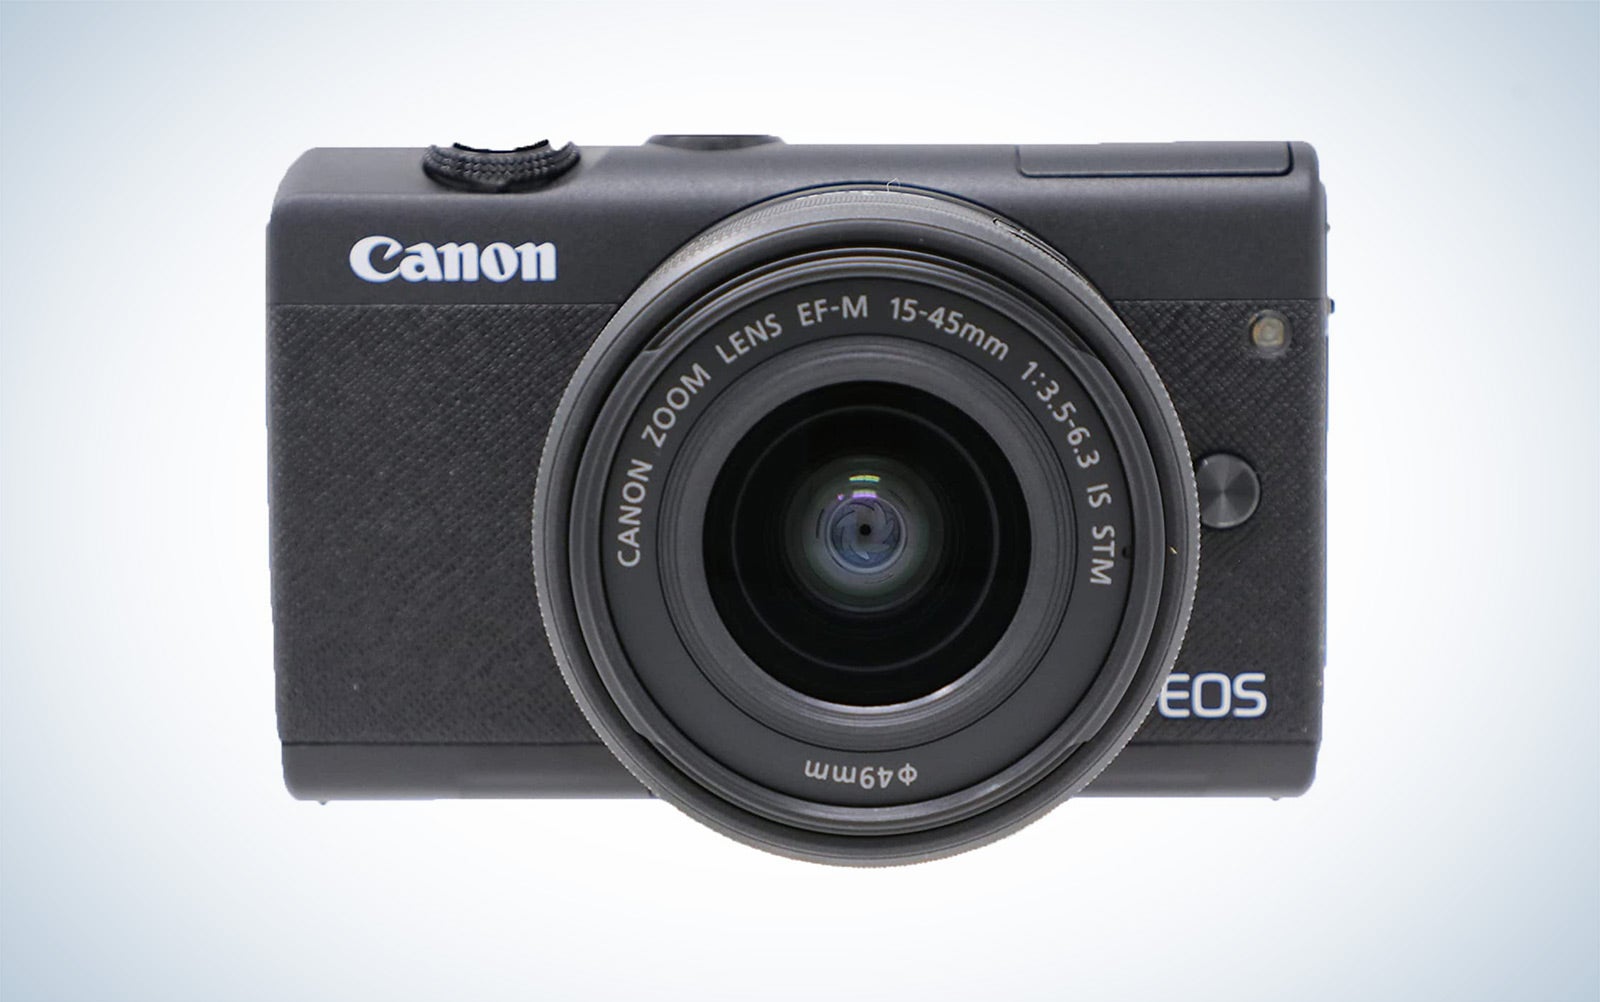 The Canon EOS M200 is the best for beginners.